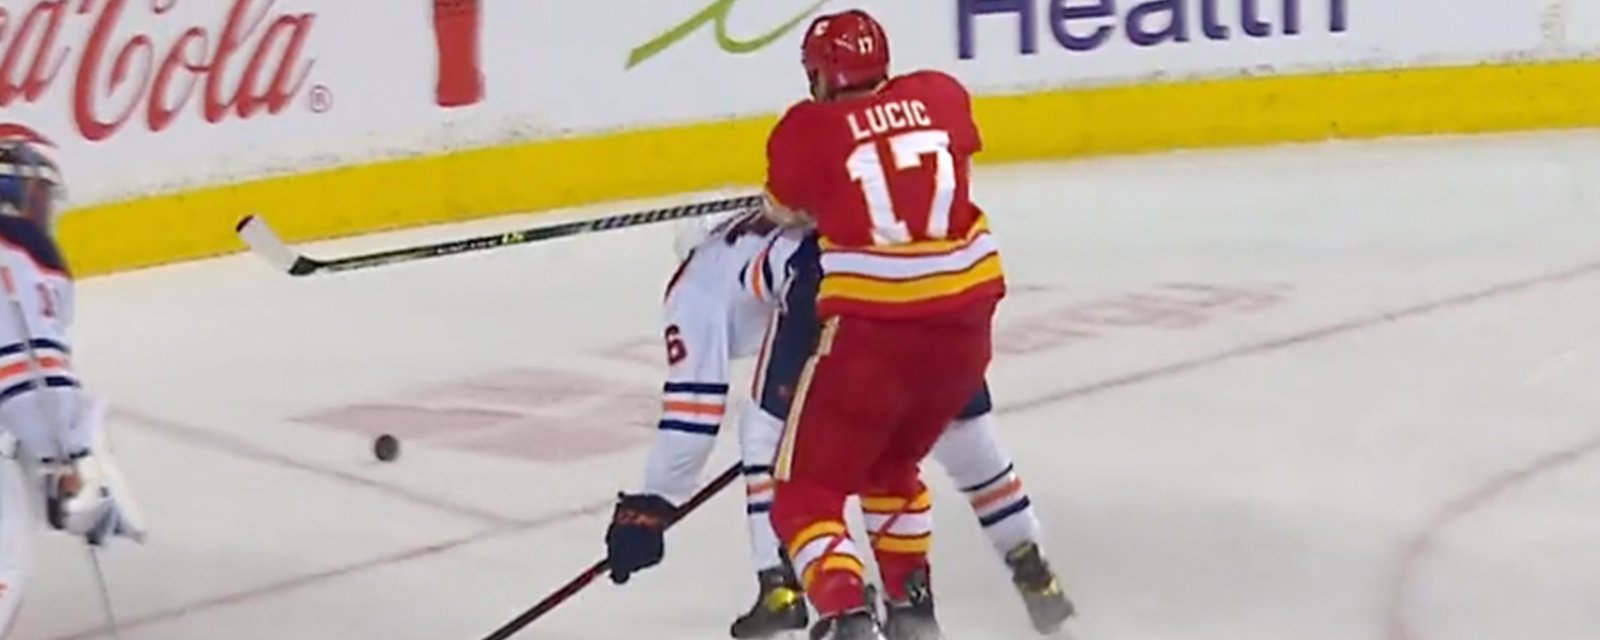 Lucic runs Broberg from behind late in Battle of Alberta